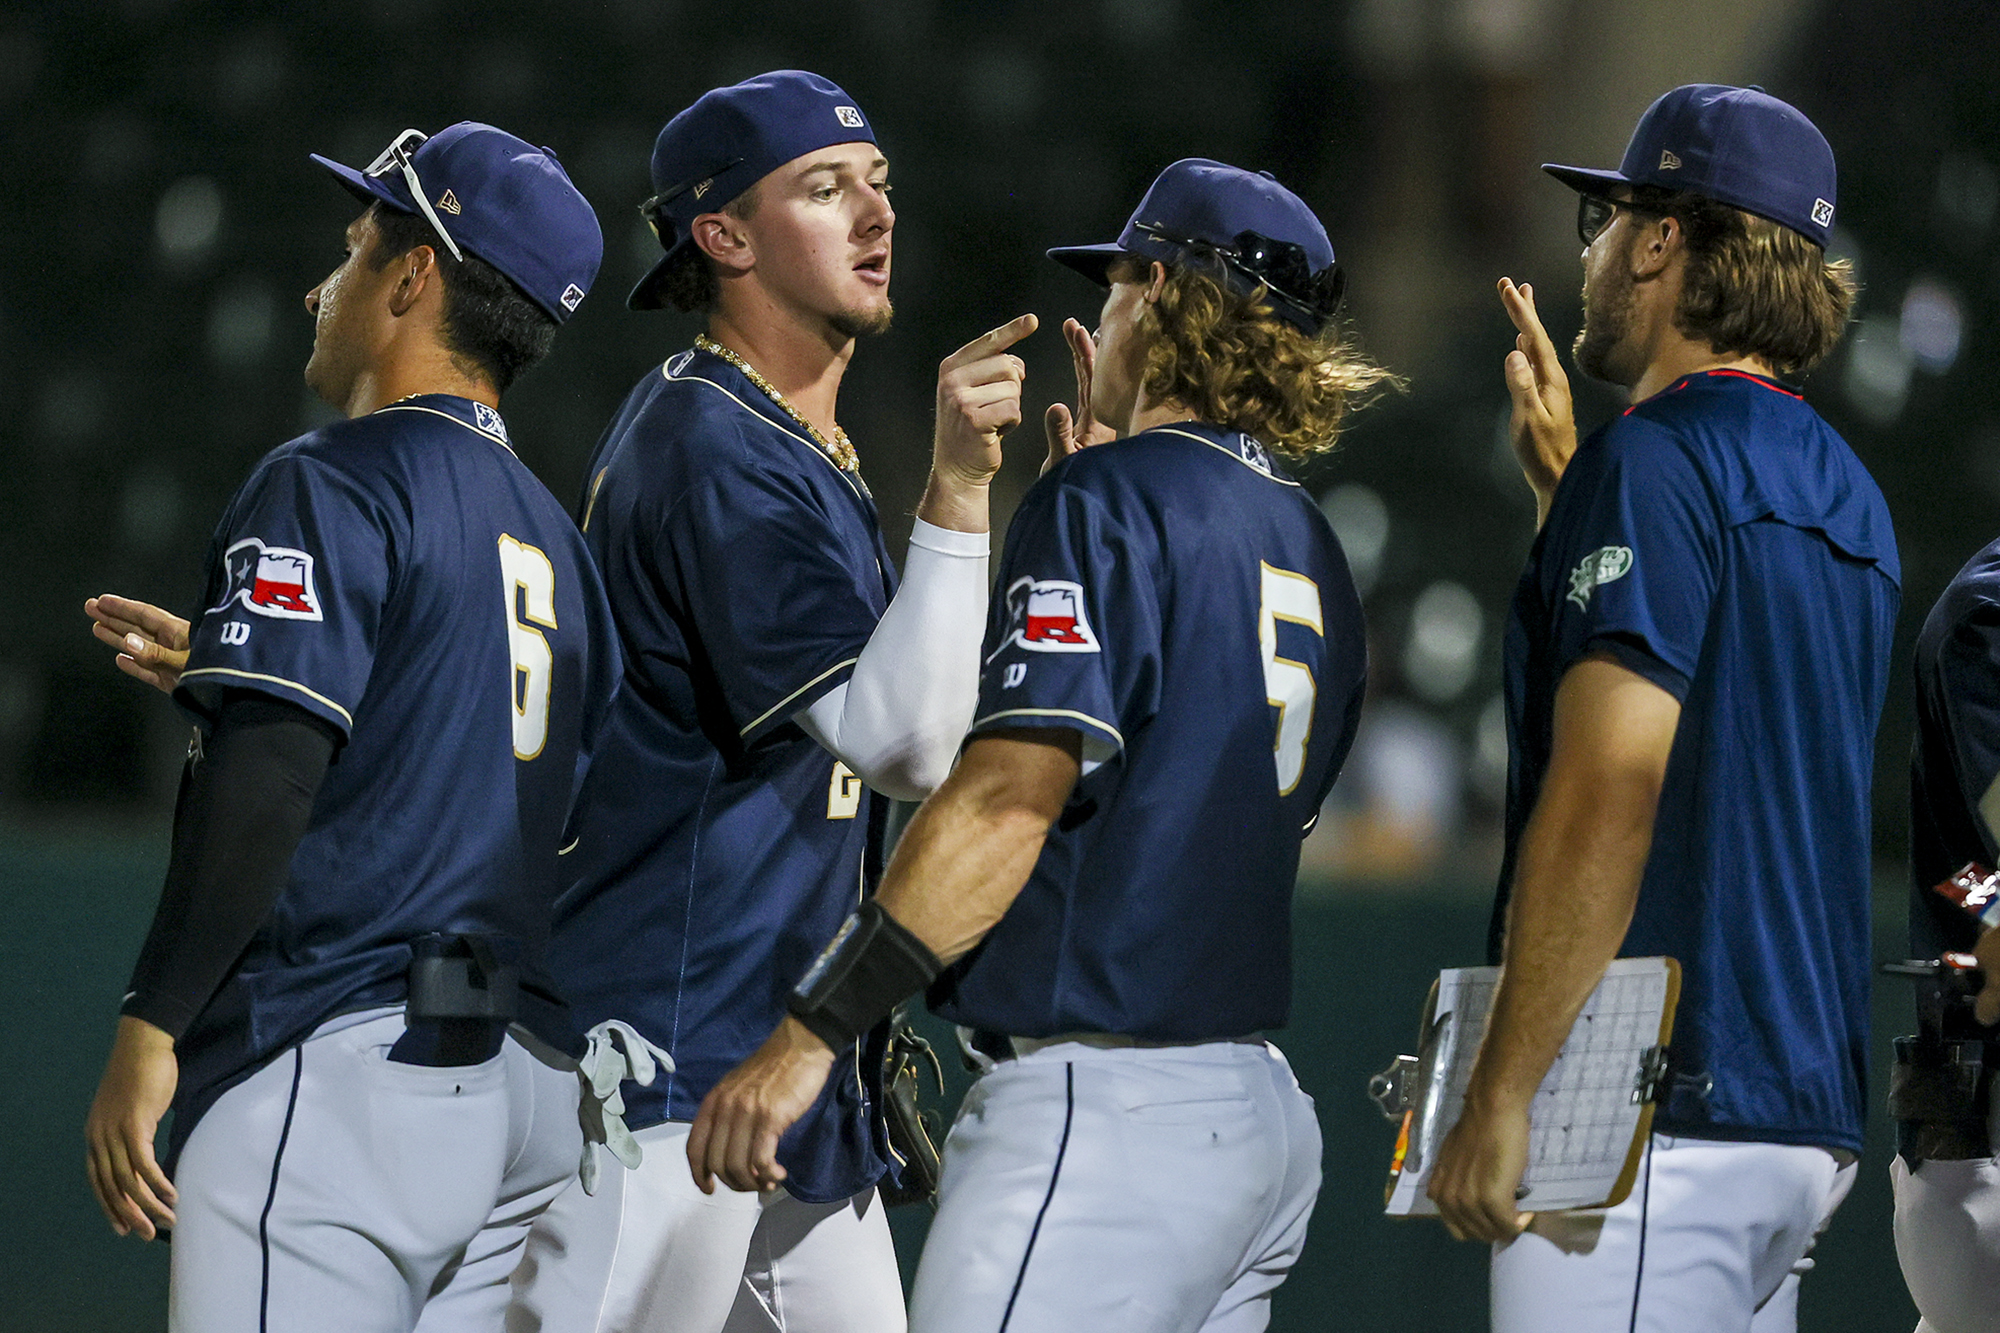 The Missions bullpen struggles in their series against Corpus Christi